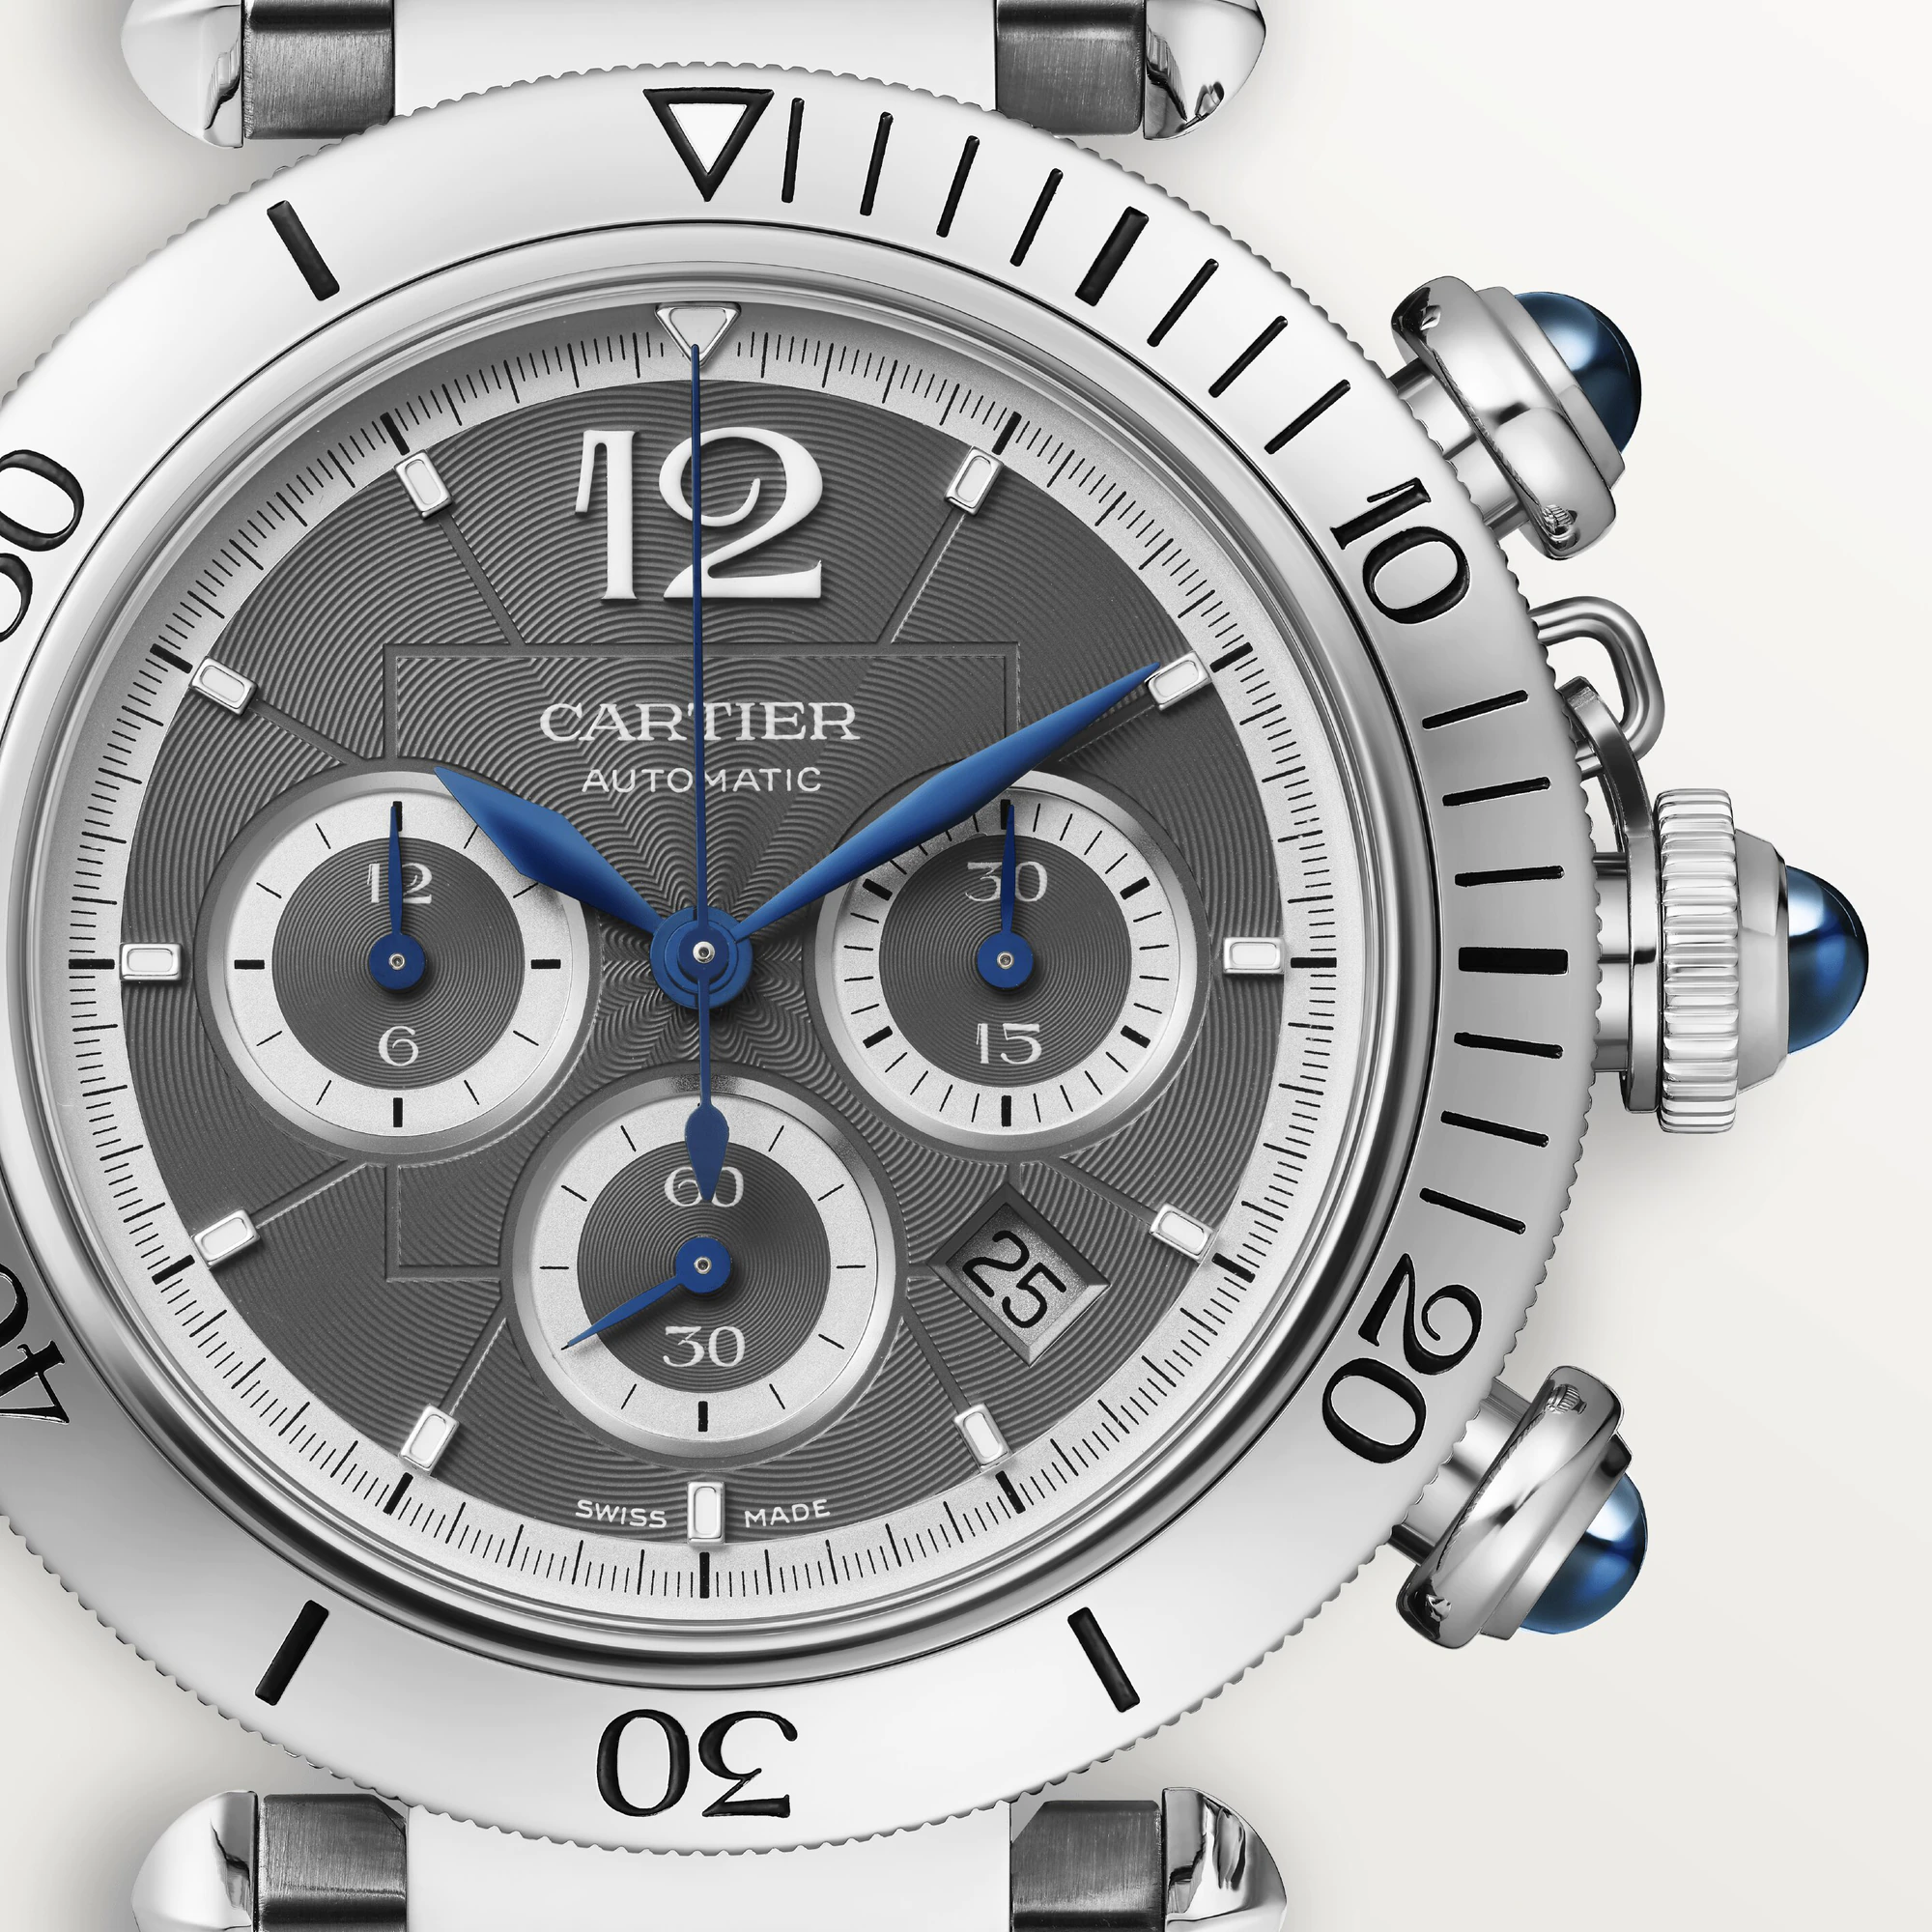 Cartier Pasha  Chronograph Stainless steel Men's Watch